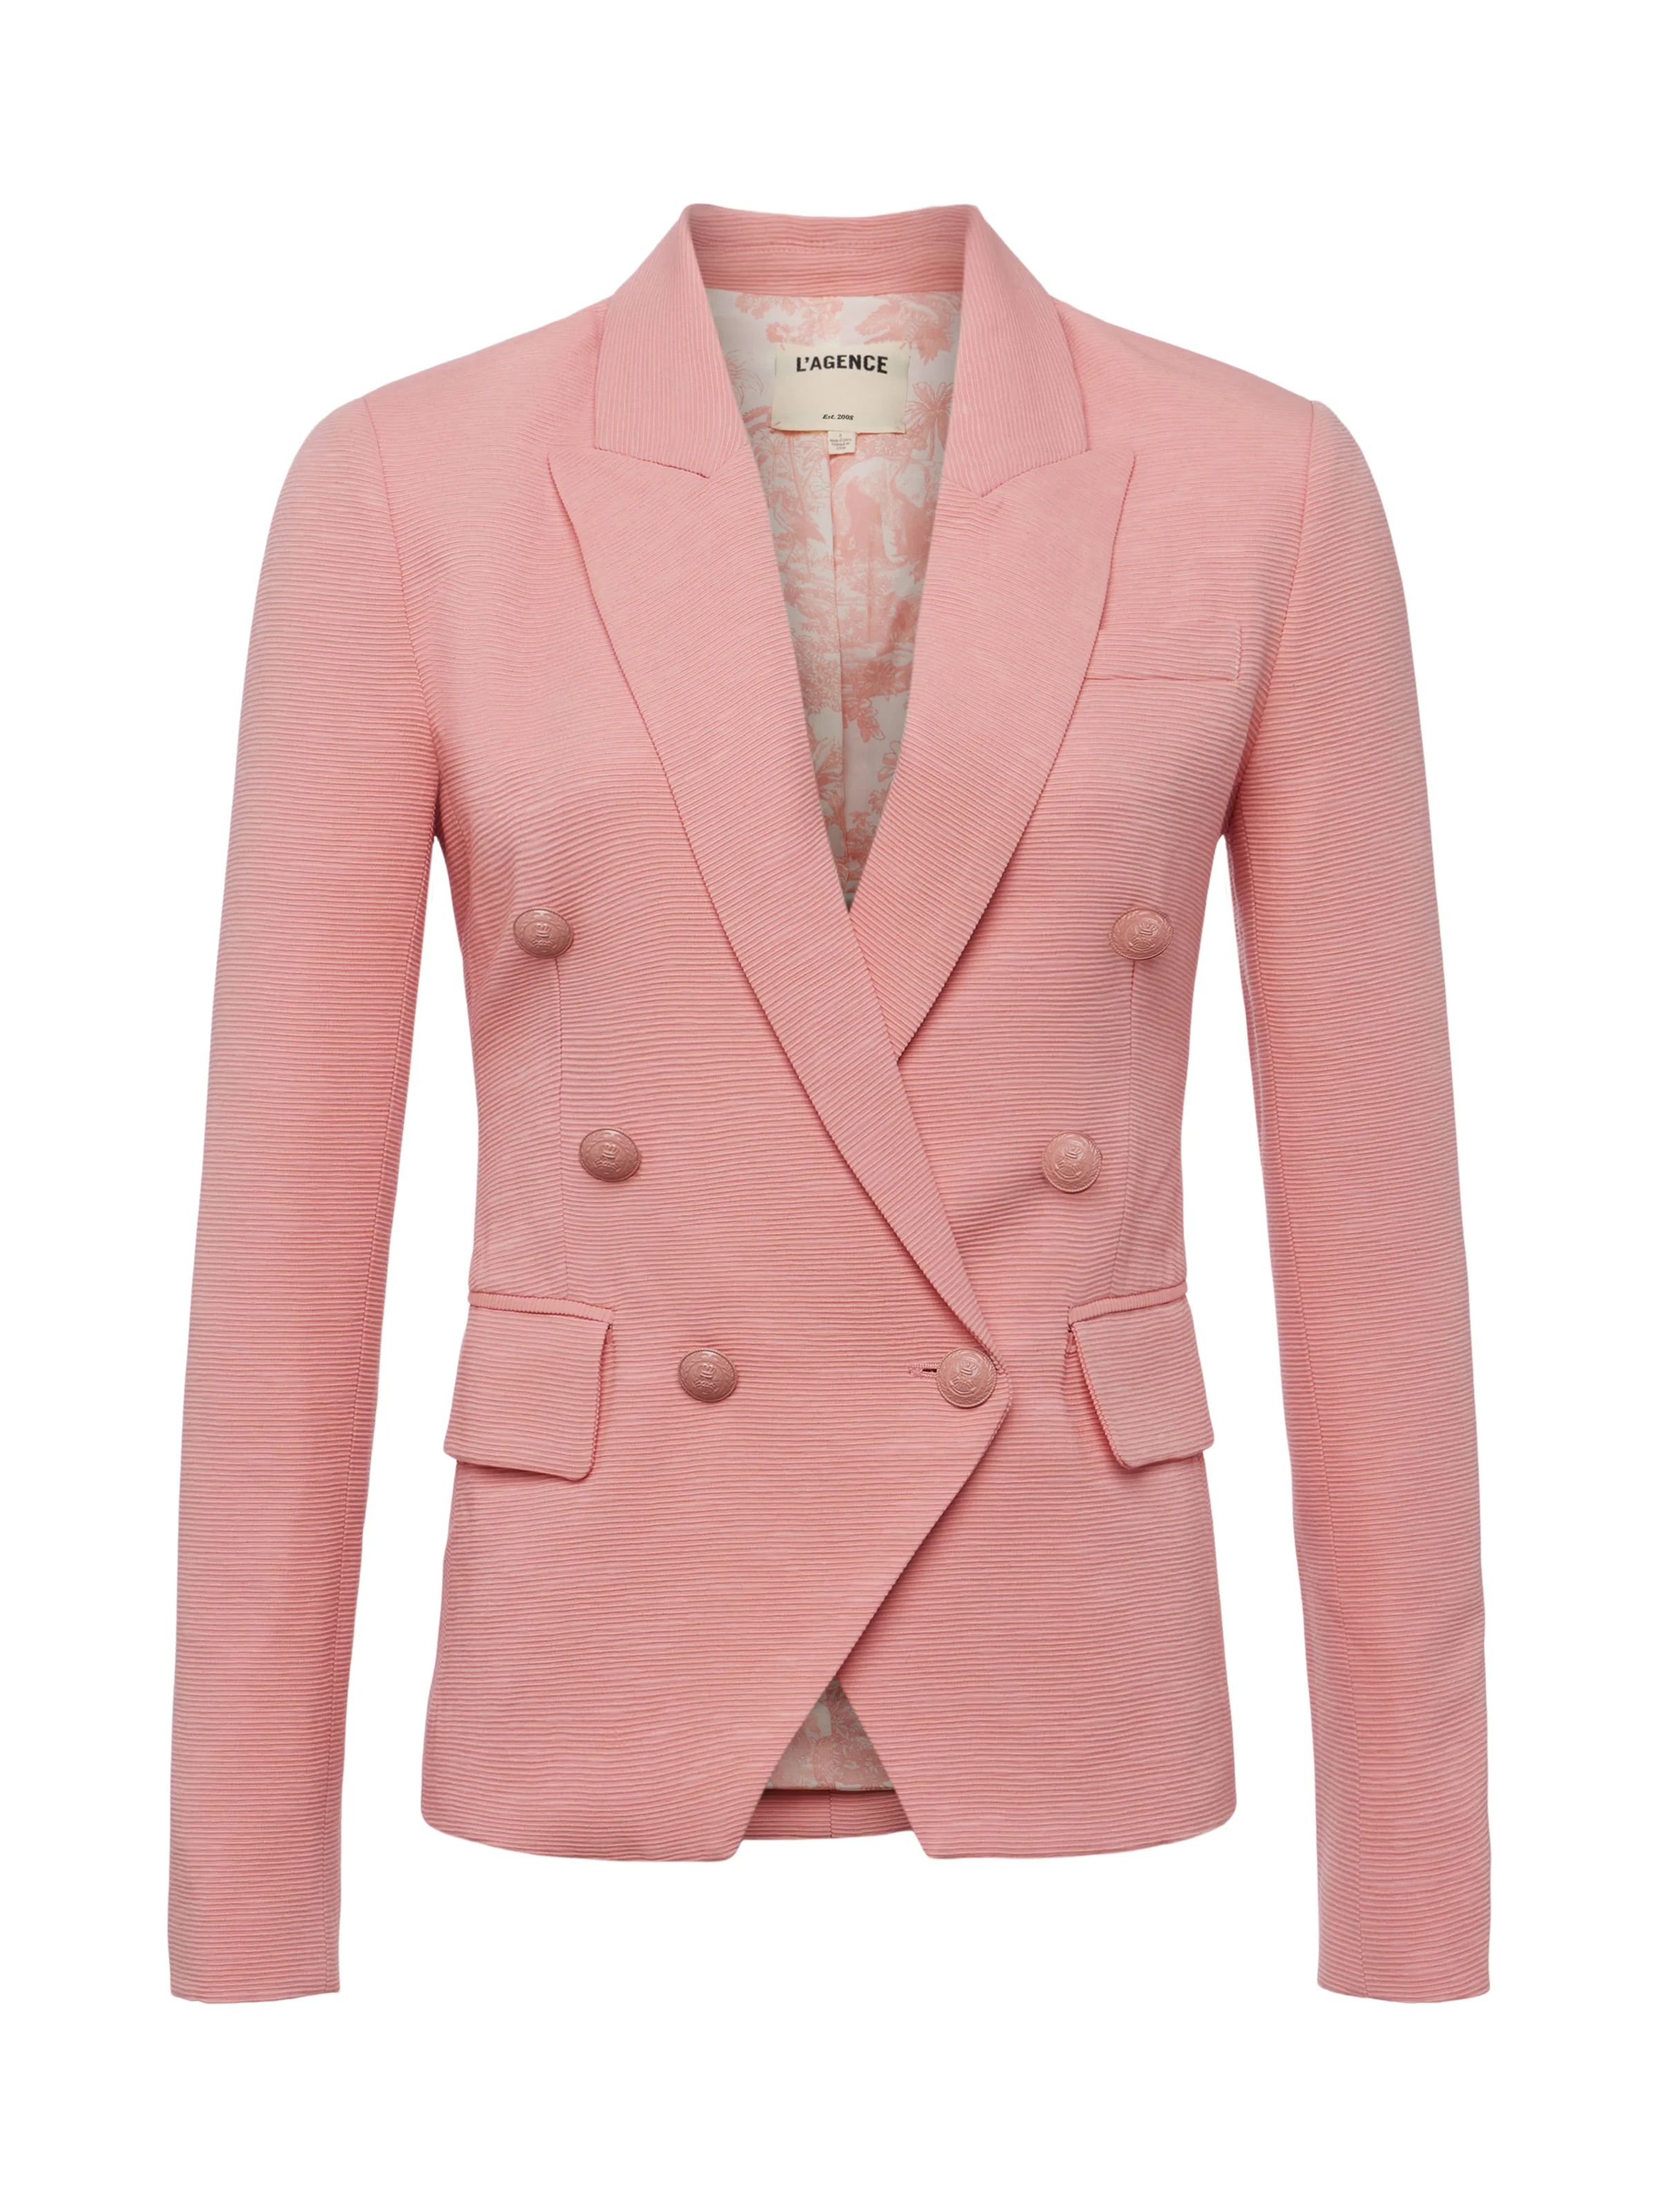 L'AGENCE Kenzie Blazer in Rose Tan/Tropical Toile | L'Agence